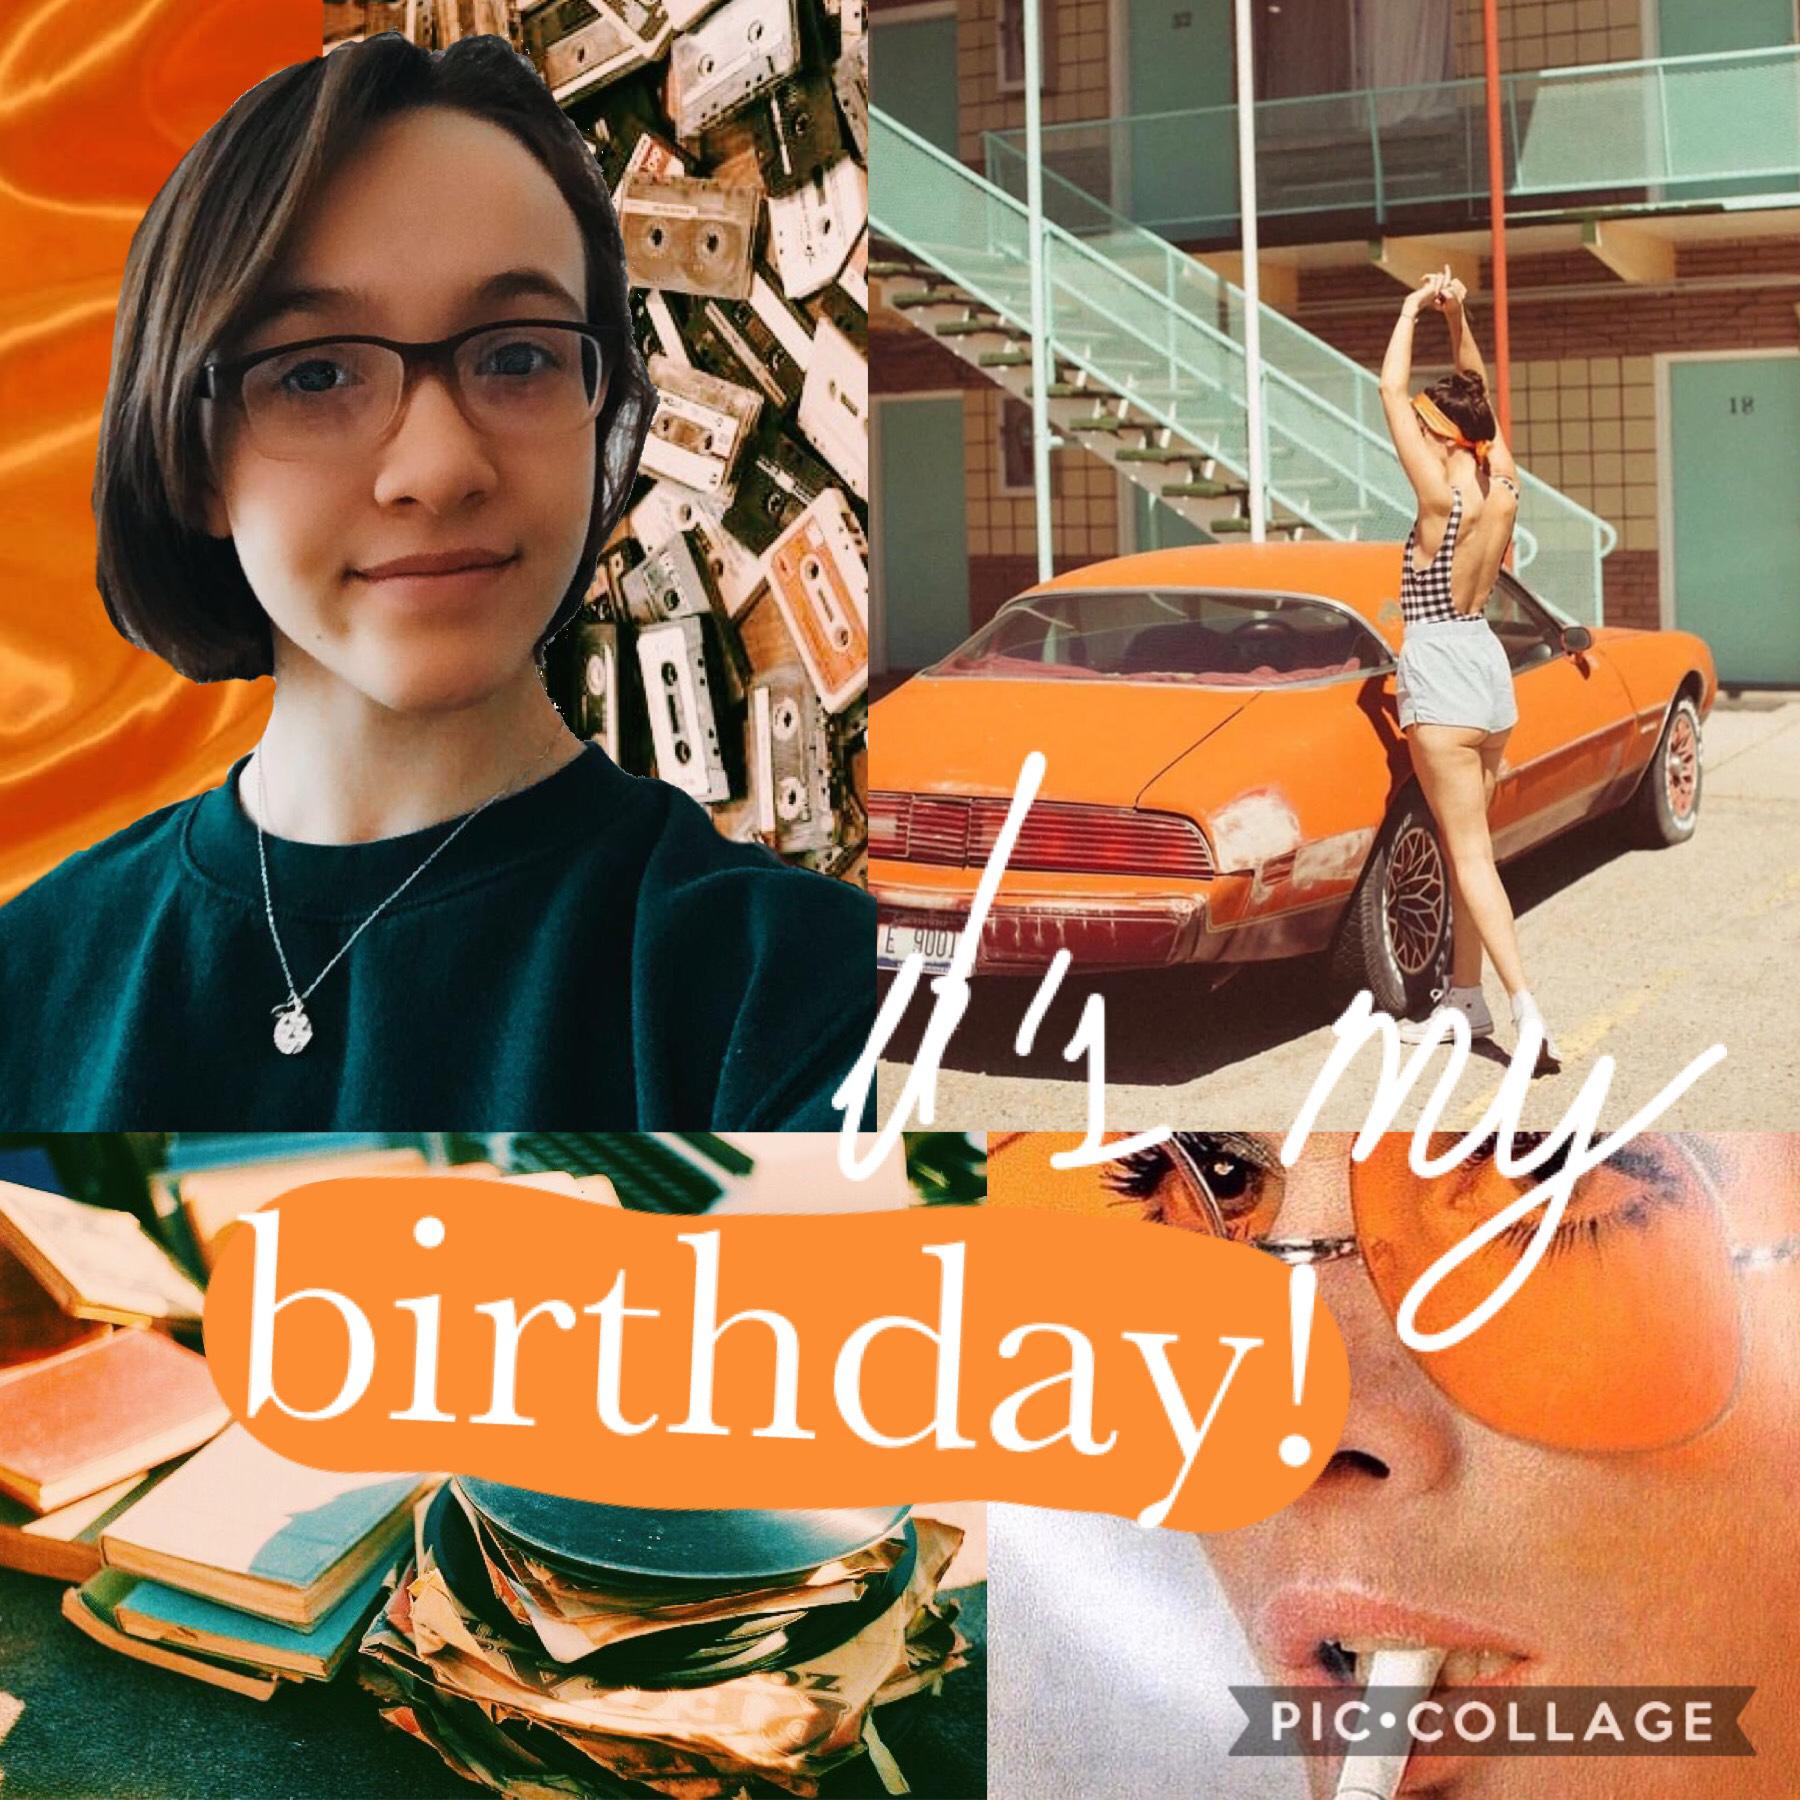 tap
MOAWH HA HA I MADE A PNG OF MYSELF AHHHHHHHHH
yeas, it is my birthday. i bet y'all don't know how old i am! take a guess :)
i'm also celebrating 200 followers! yeeeeeeeeet🤙🏼 y'all want a contest? 